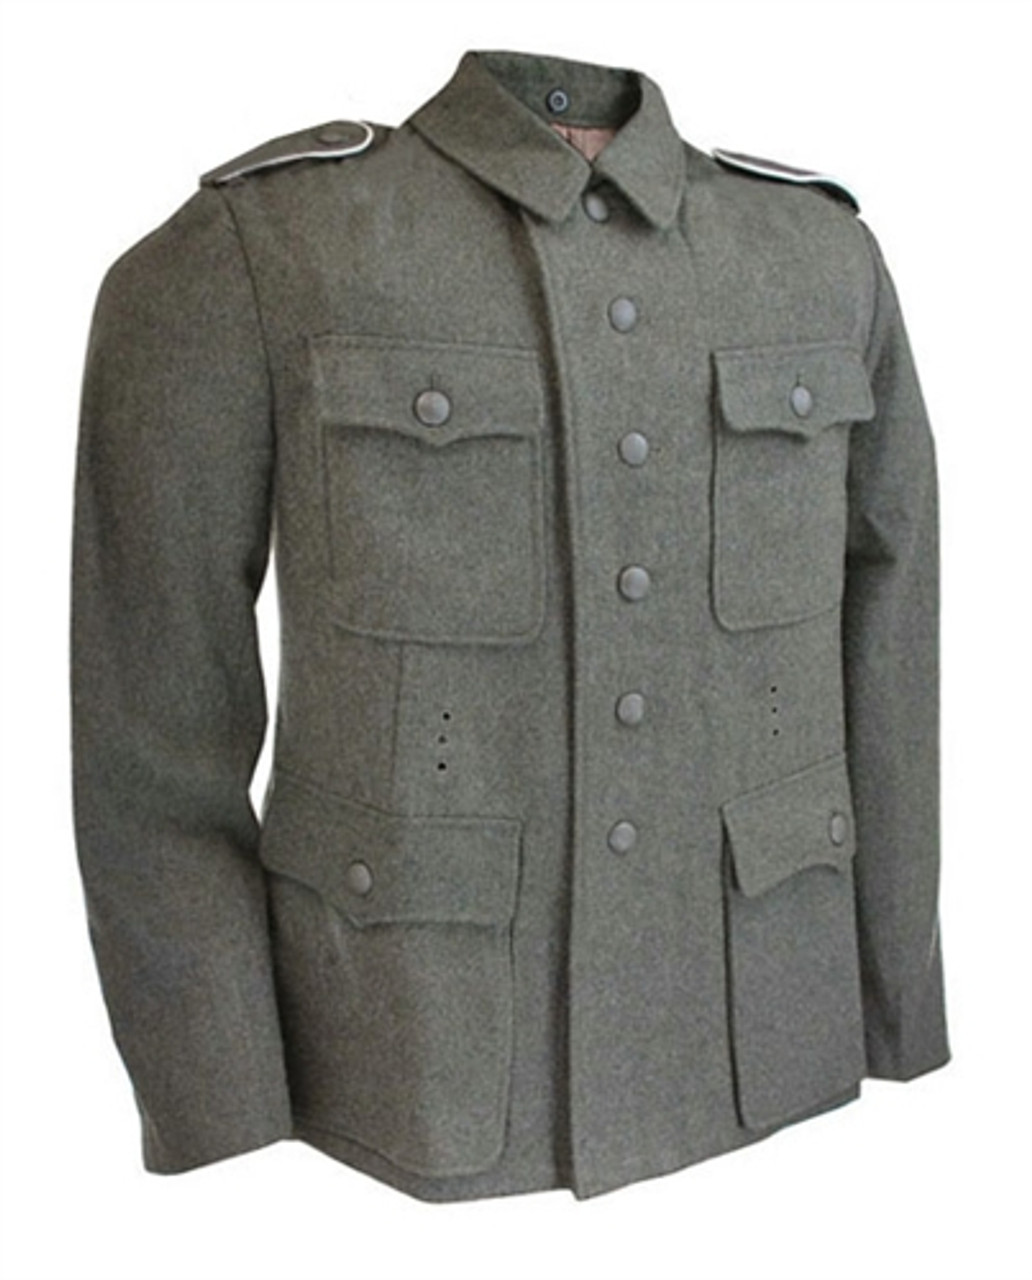 M42 Tunic from Hessen Antique